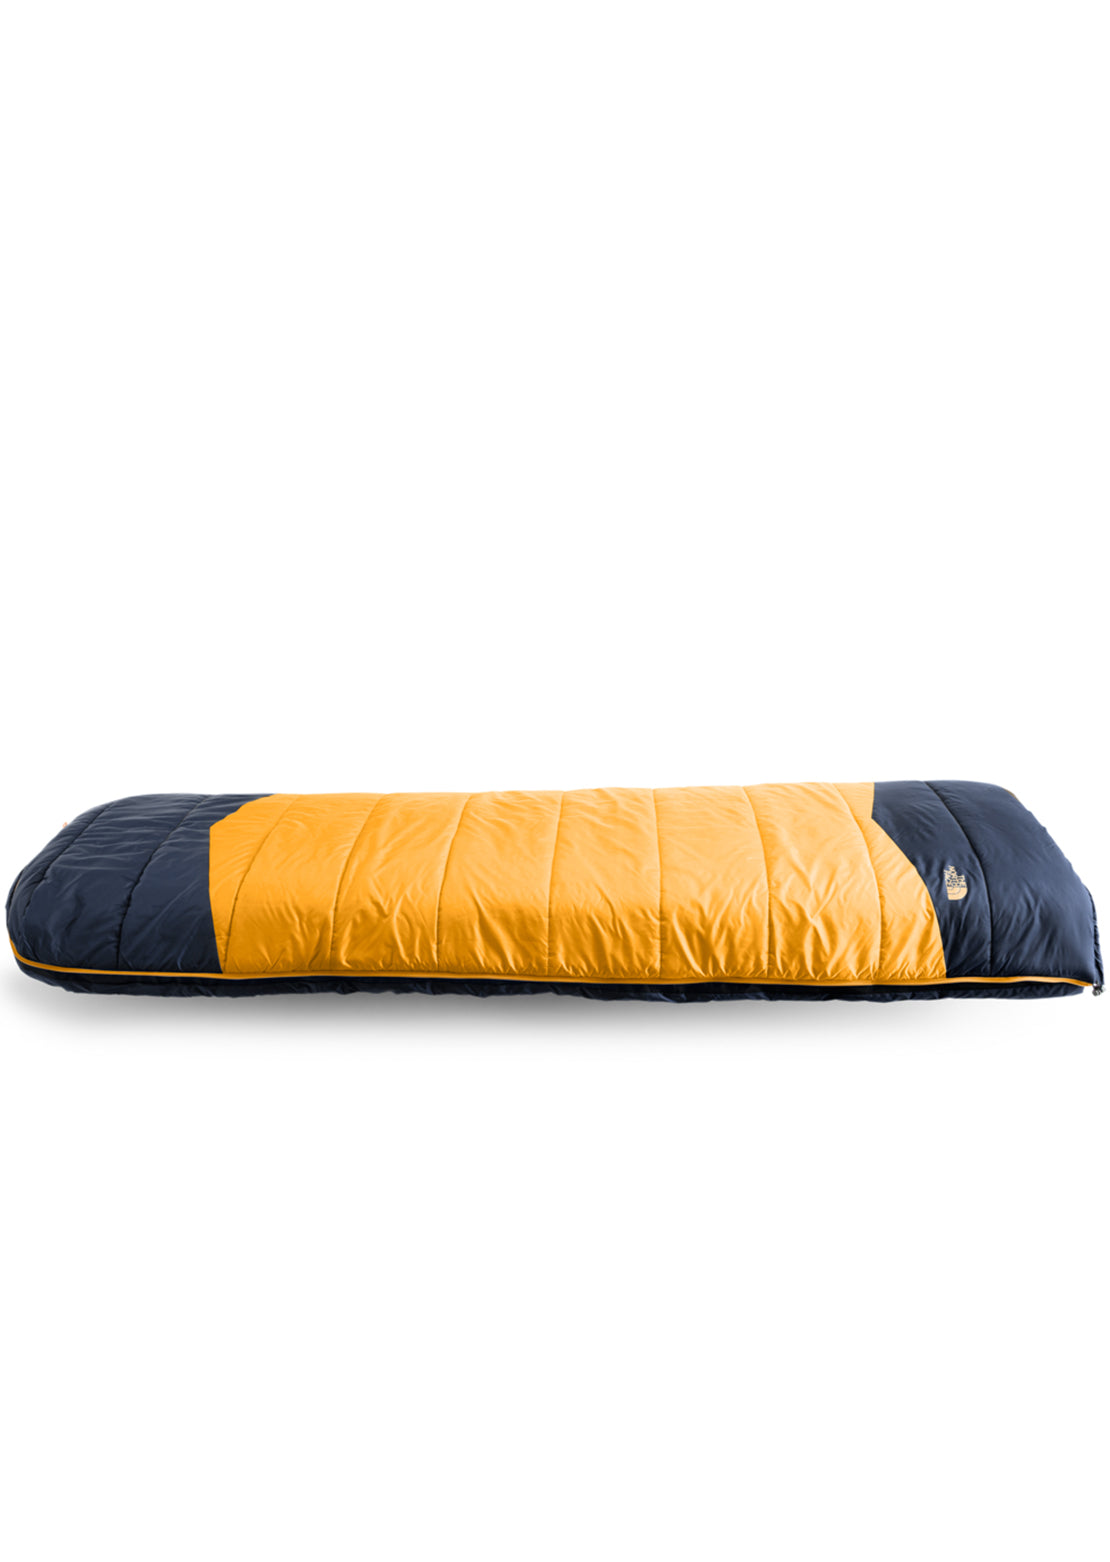 The North Face Dolomite One Sleeping Bag Hyper Blue/Radiant Yellow / Regular